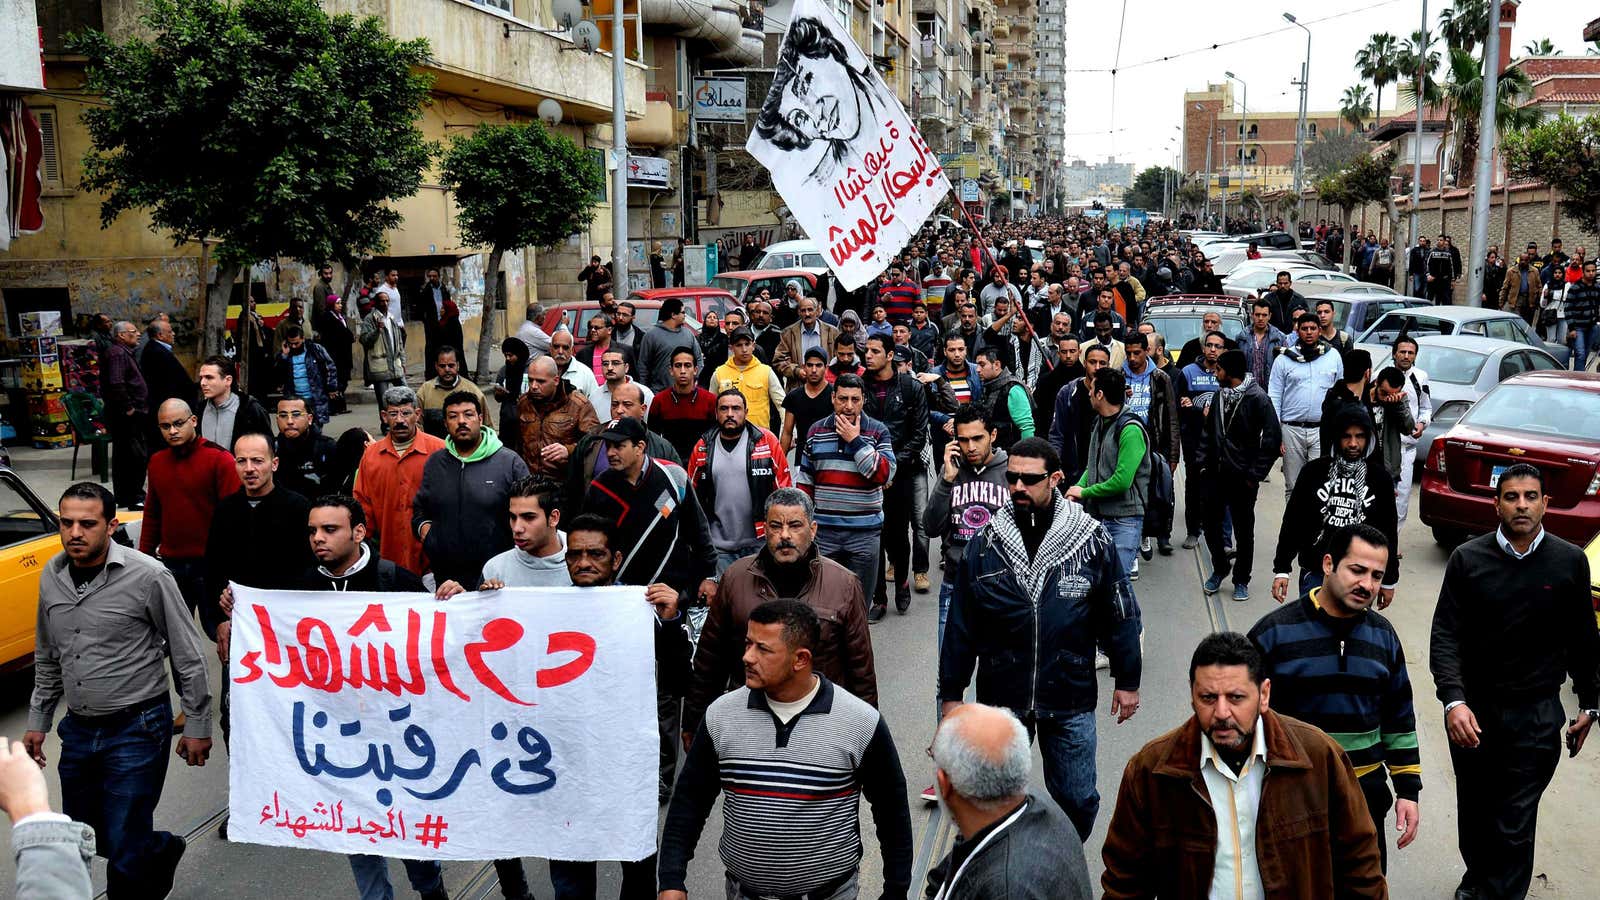 The funeral procession of Shaimaa el-Sabagh.